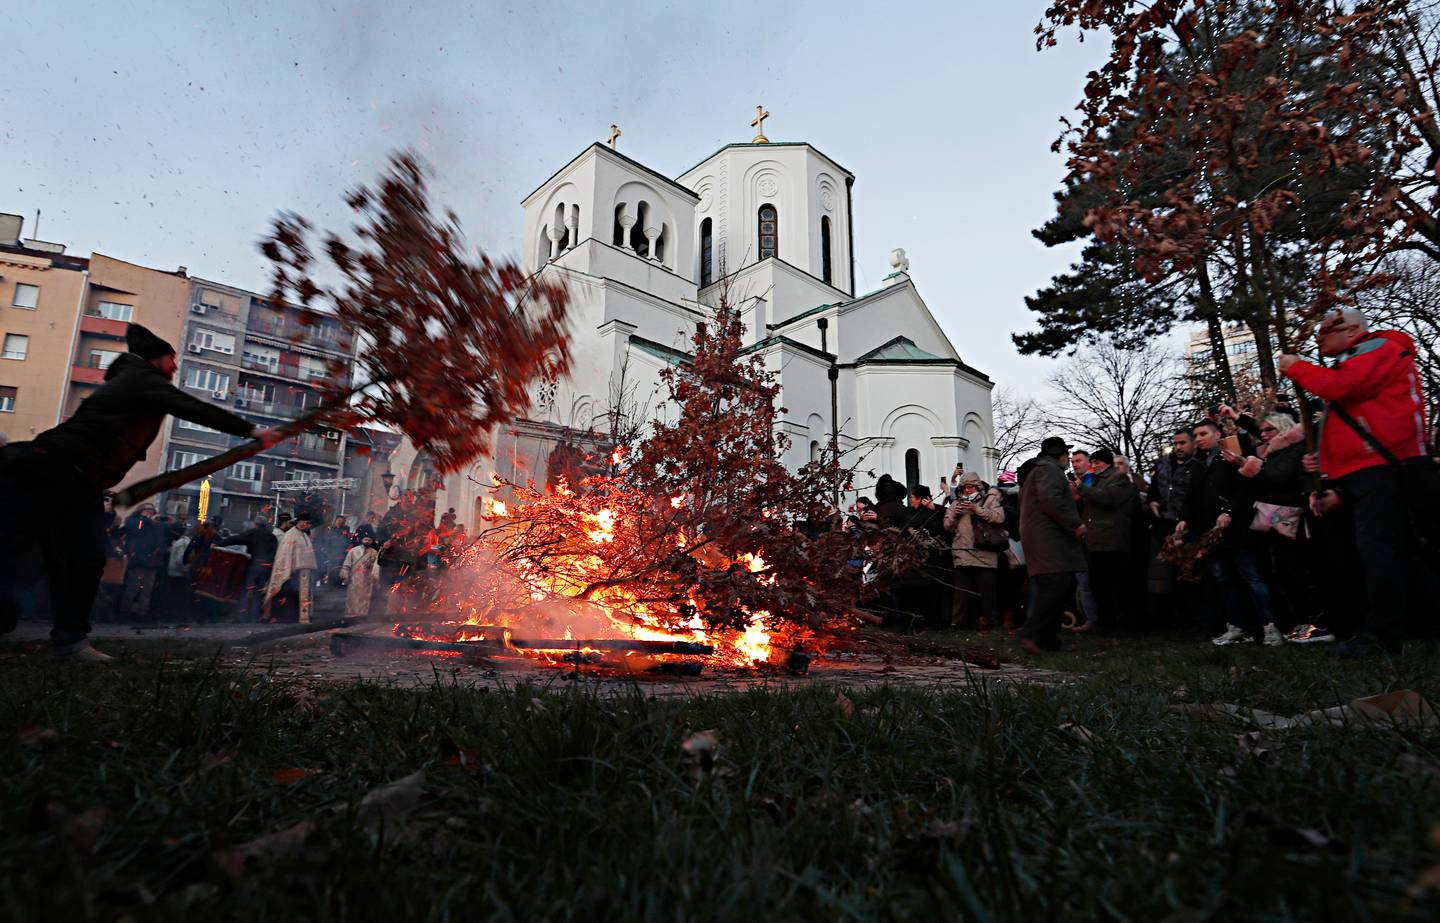 A man burns dried oak branches, the Yule log symbol for the Orthodox Christmas Eve, in front of St. Sava church in Belgrade, Serbia, Jan. 6, 2020. Orthodox believers in Serbia celebrate Christmas on January 7, according to the Julian calendar. (AP Photo/Darko Vojinovic)